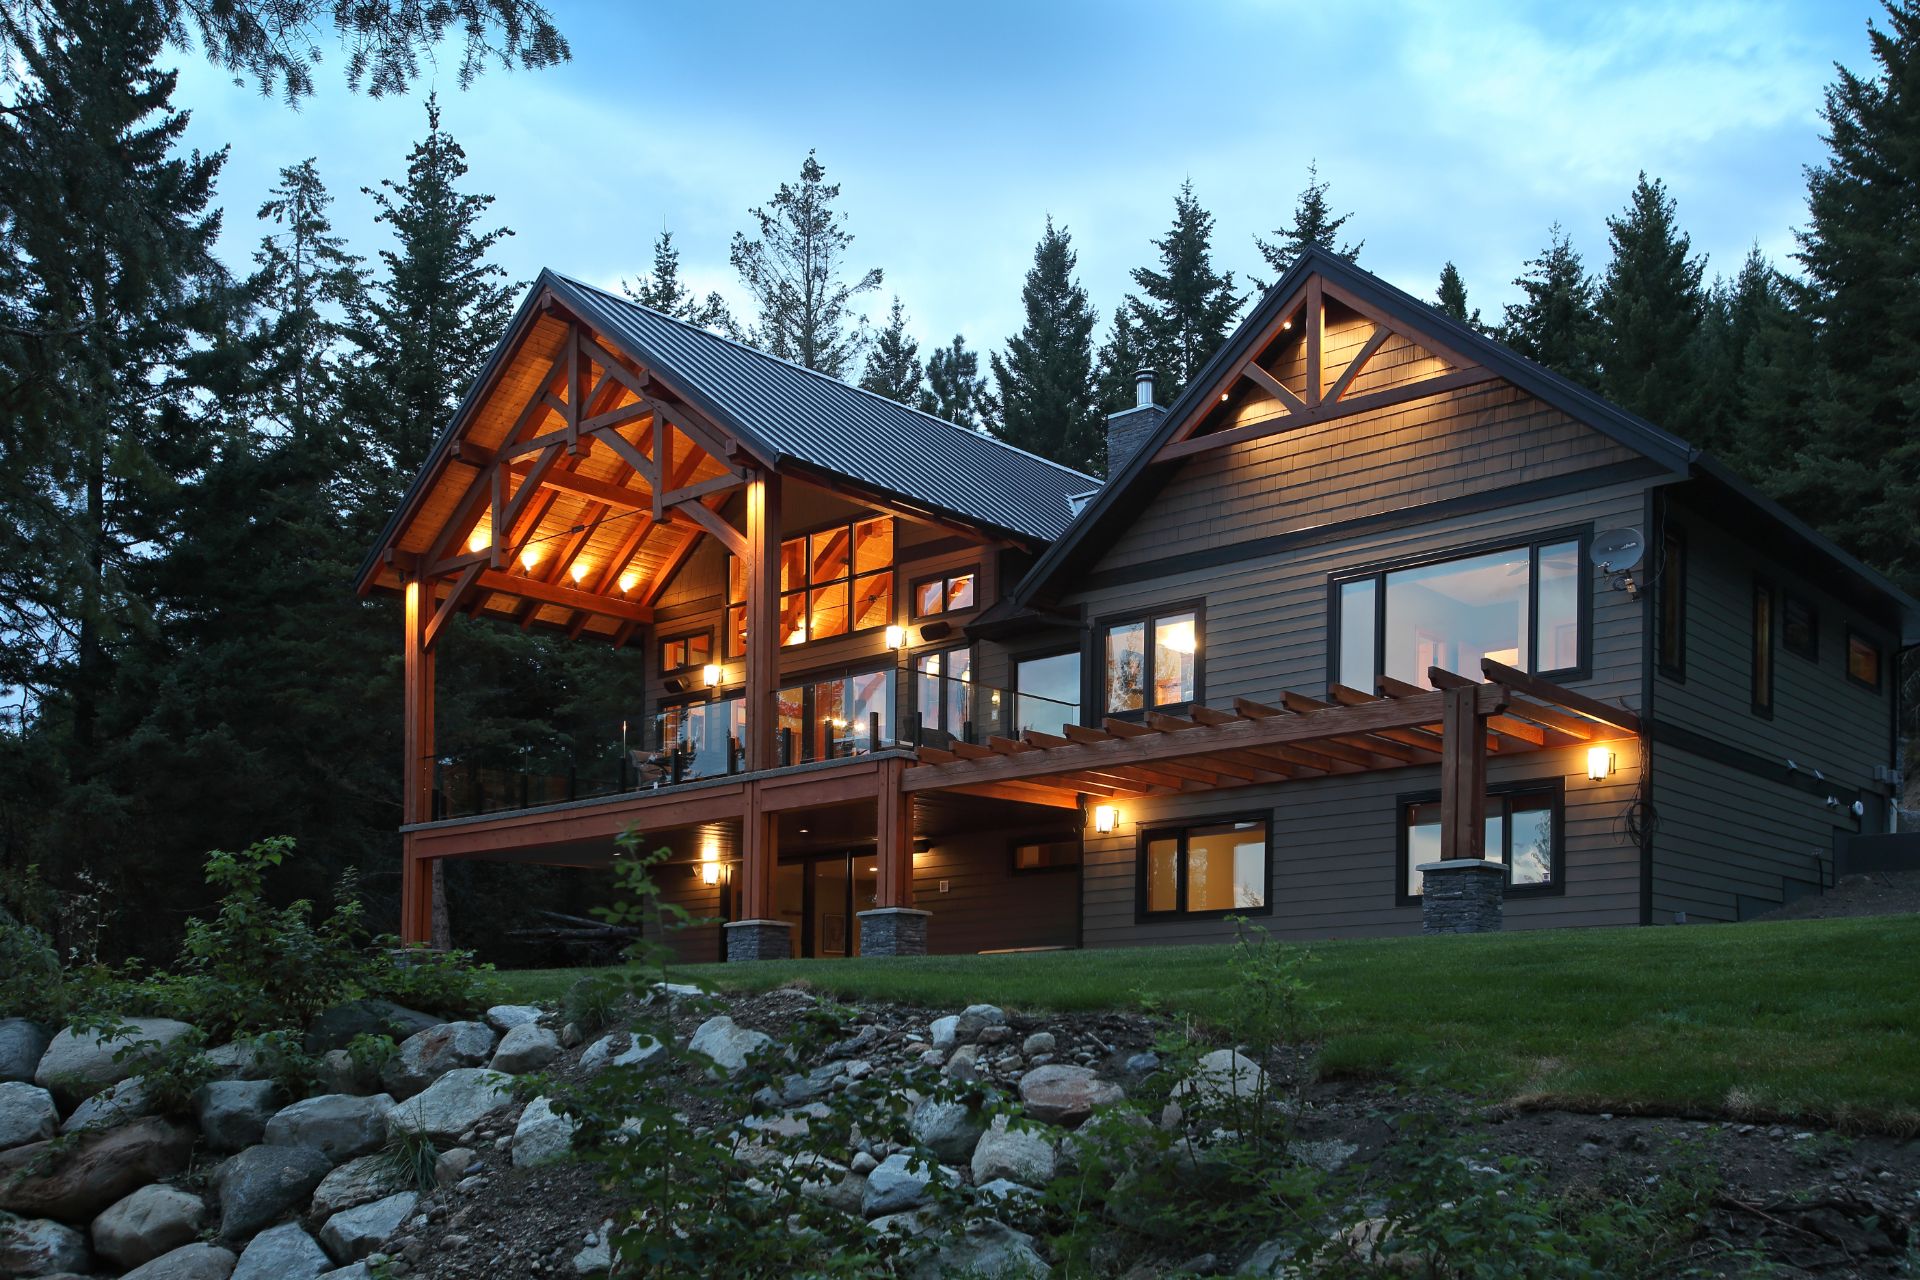 Picture of timber frame home at dusk with interior and porch lights on.